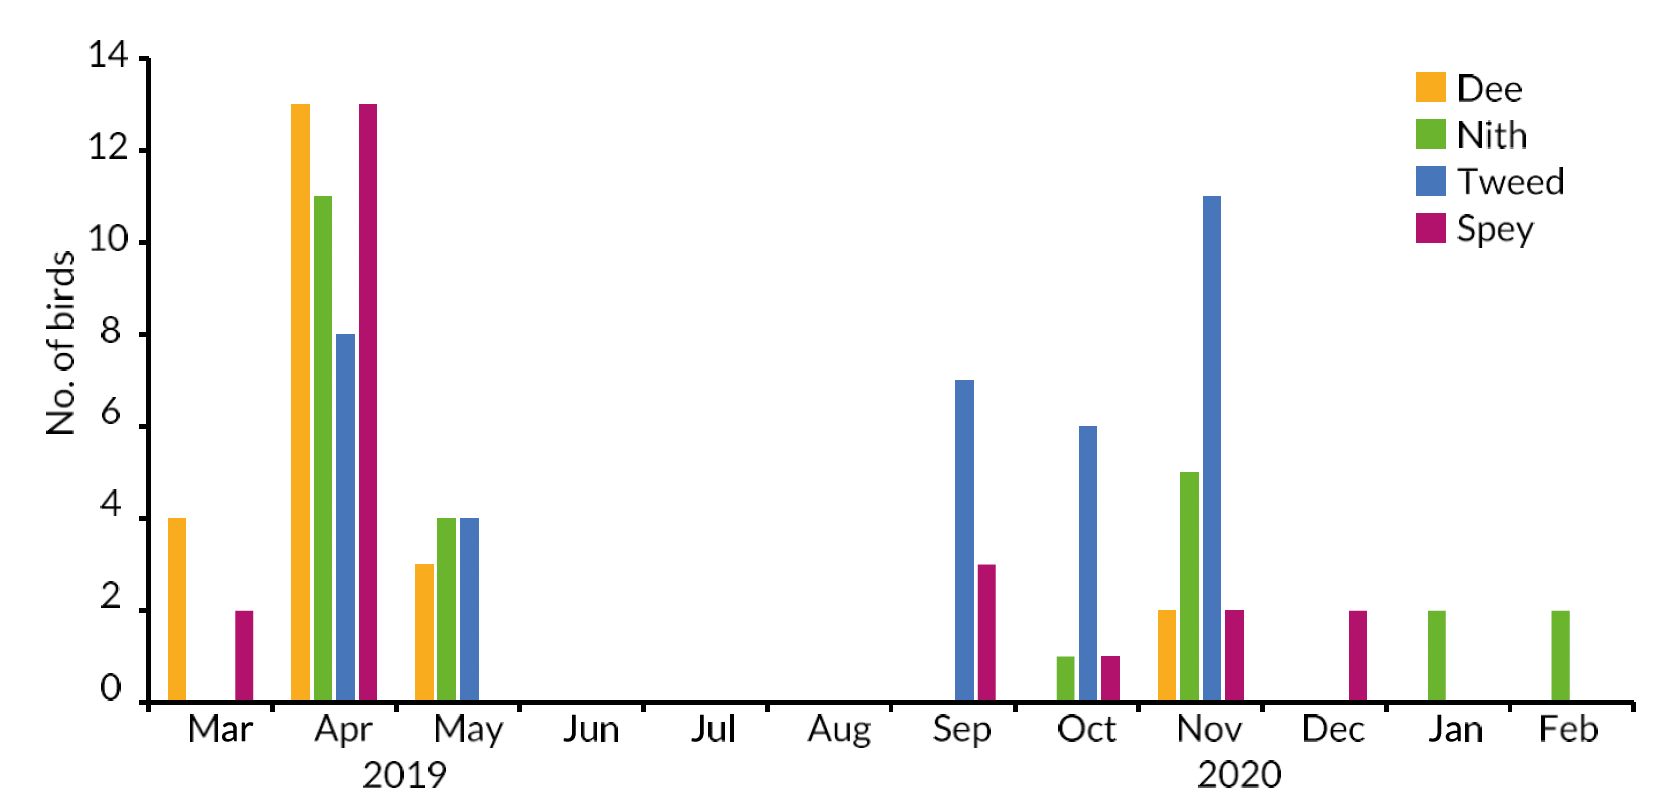 Bar chart showing monthly numbers of Goosanders sampled on each river during the study period (March 2019 - Feb 2020).